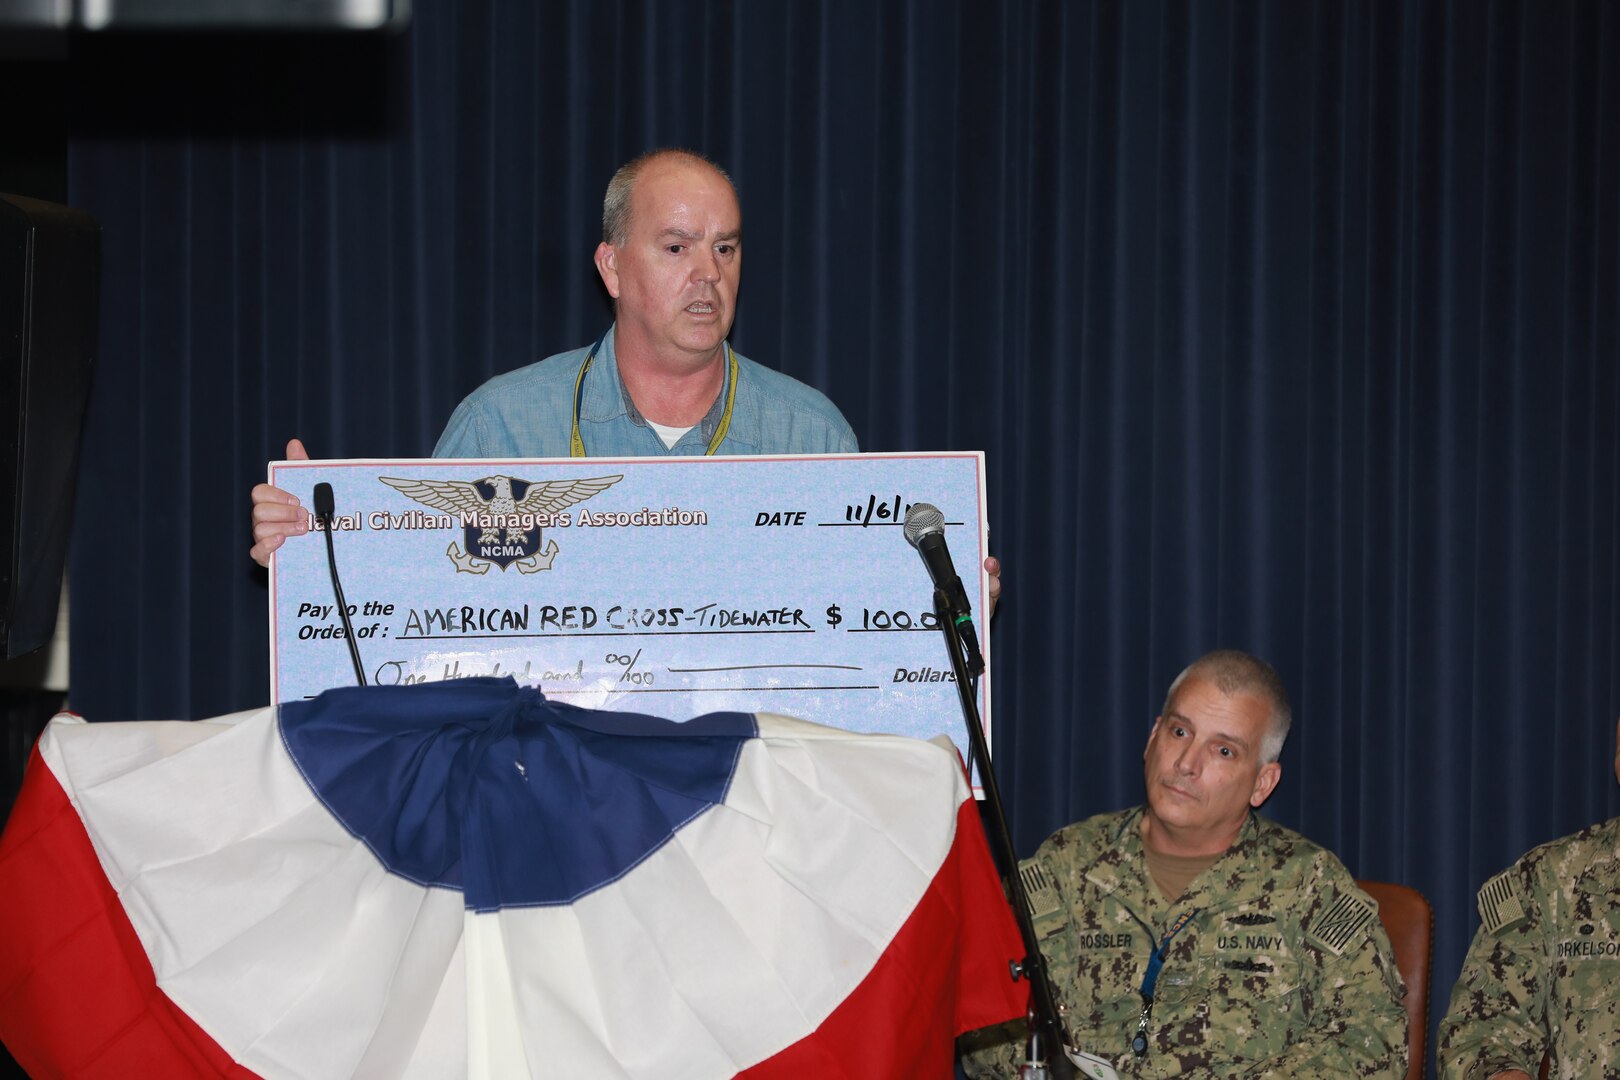 NNSY’s Naval Civilian Managers Association (NCMA) Chairperson Bill Welch started off the donations for Combined Federal Campaign by donating $100 to the Red Cross.